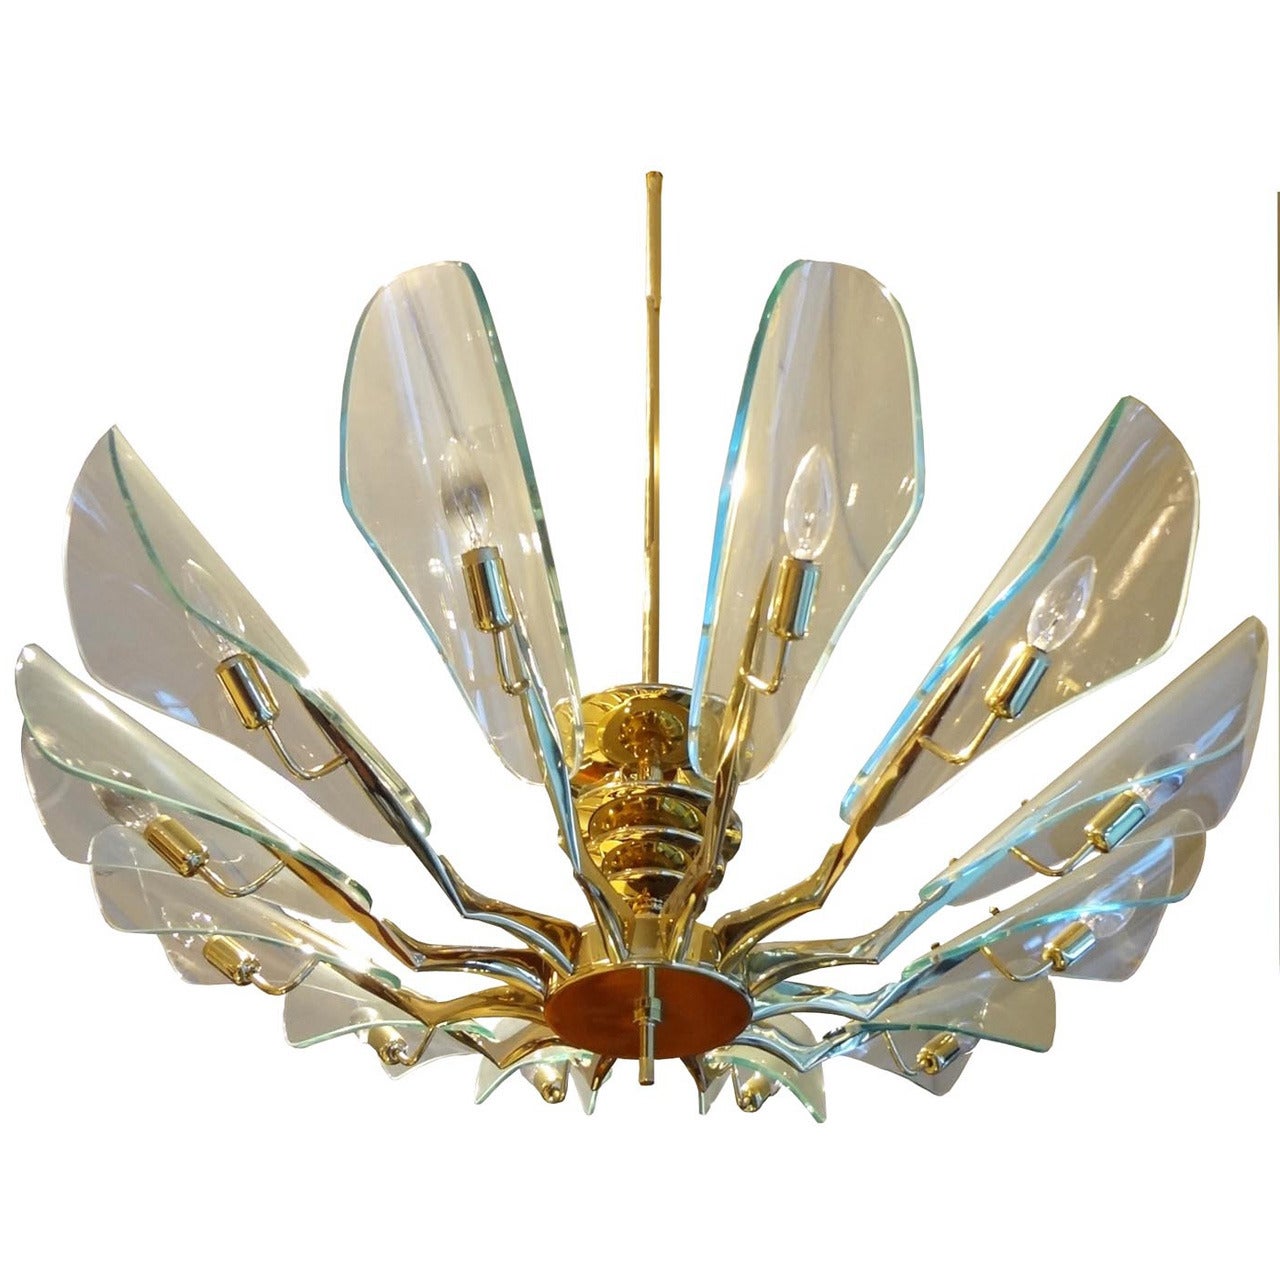 Pair of 12 Light Mid-Century Chandeliers Attributed to Stilnovo circa 1960 For Sale